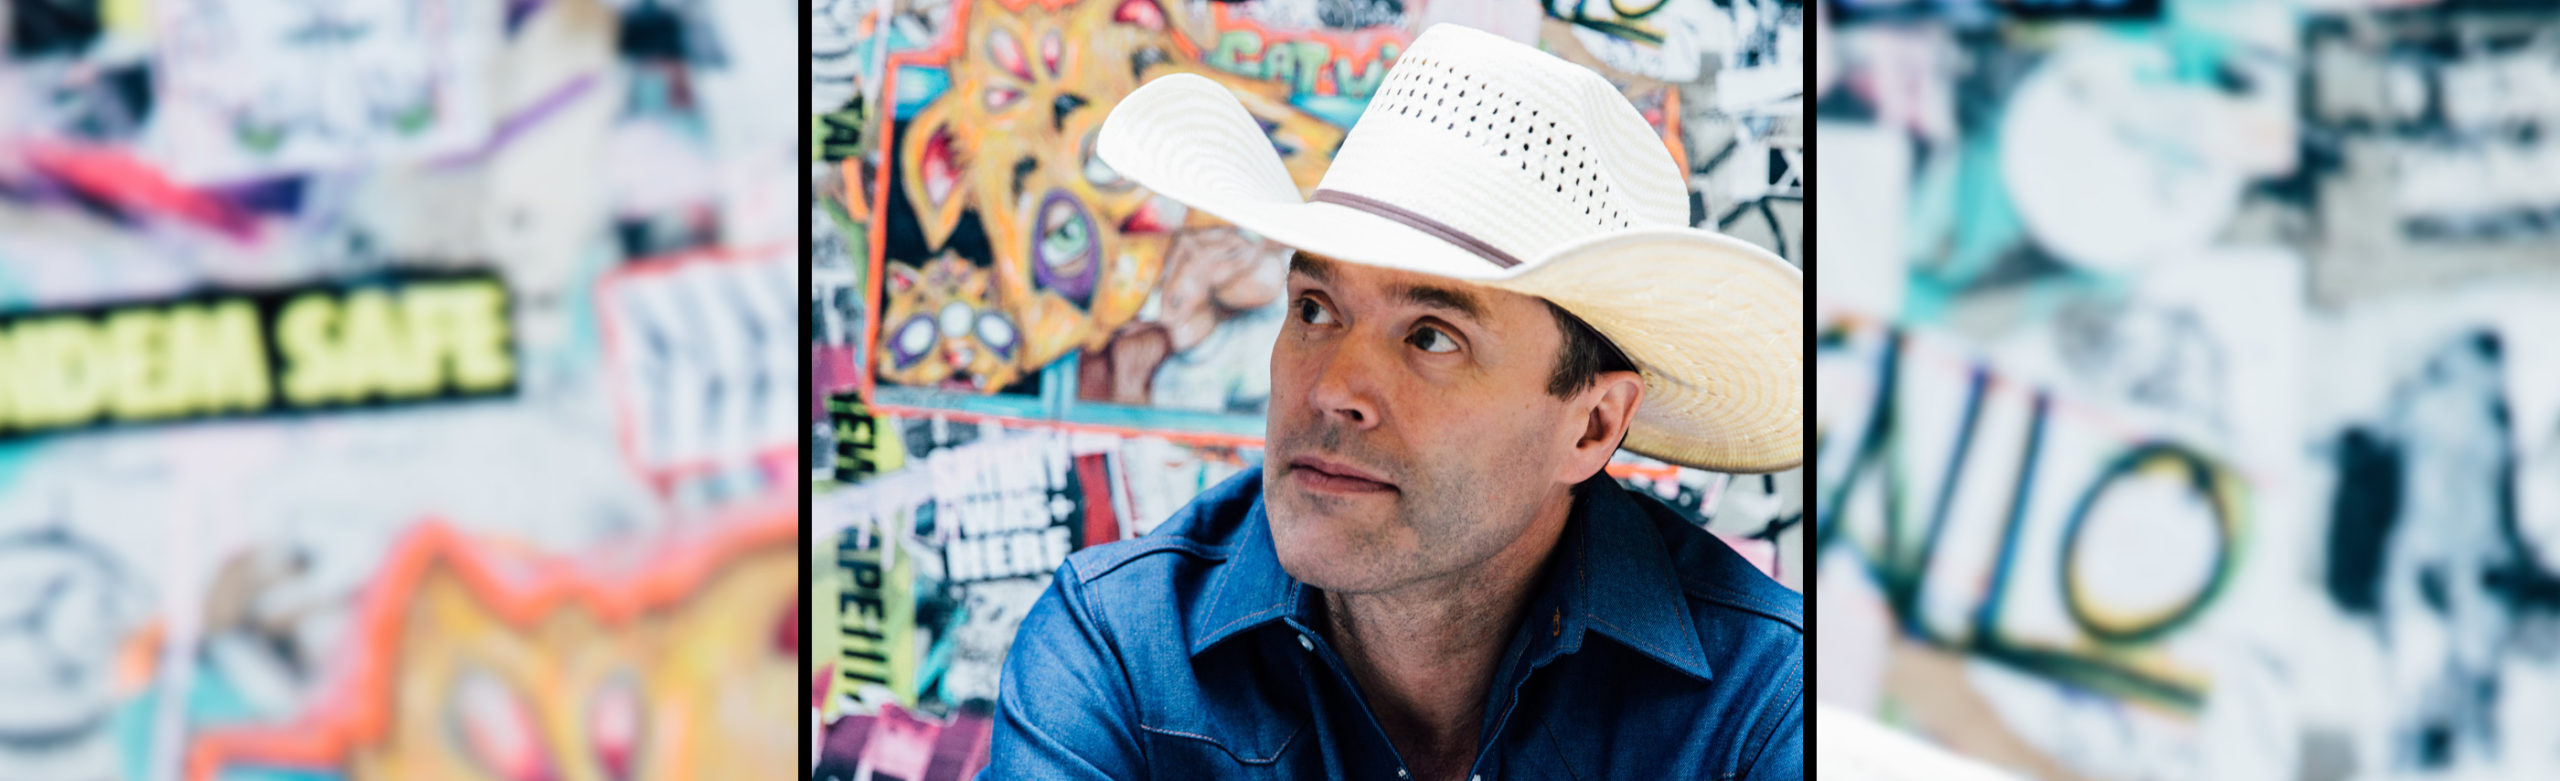 VENUE CHANGE: Corb Lund Moved to The Wilma Image